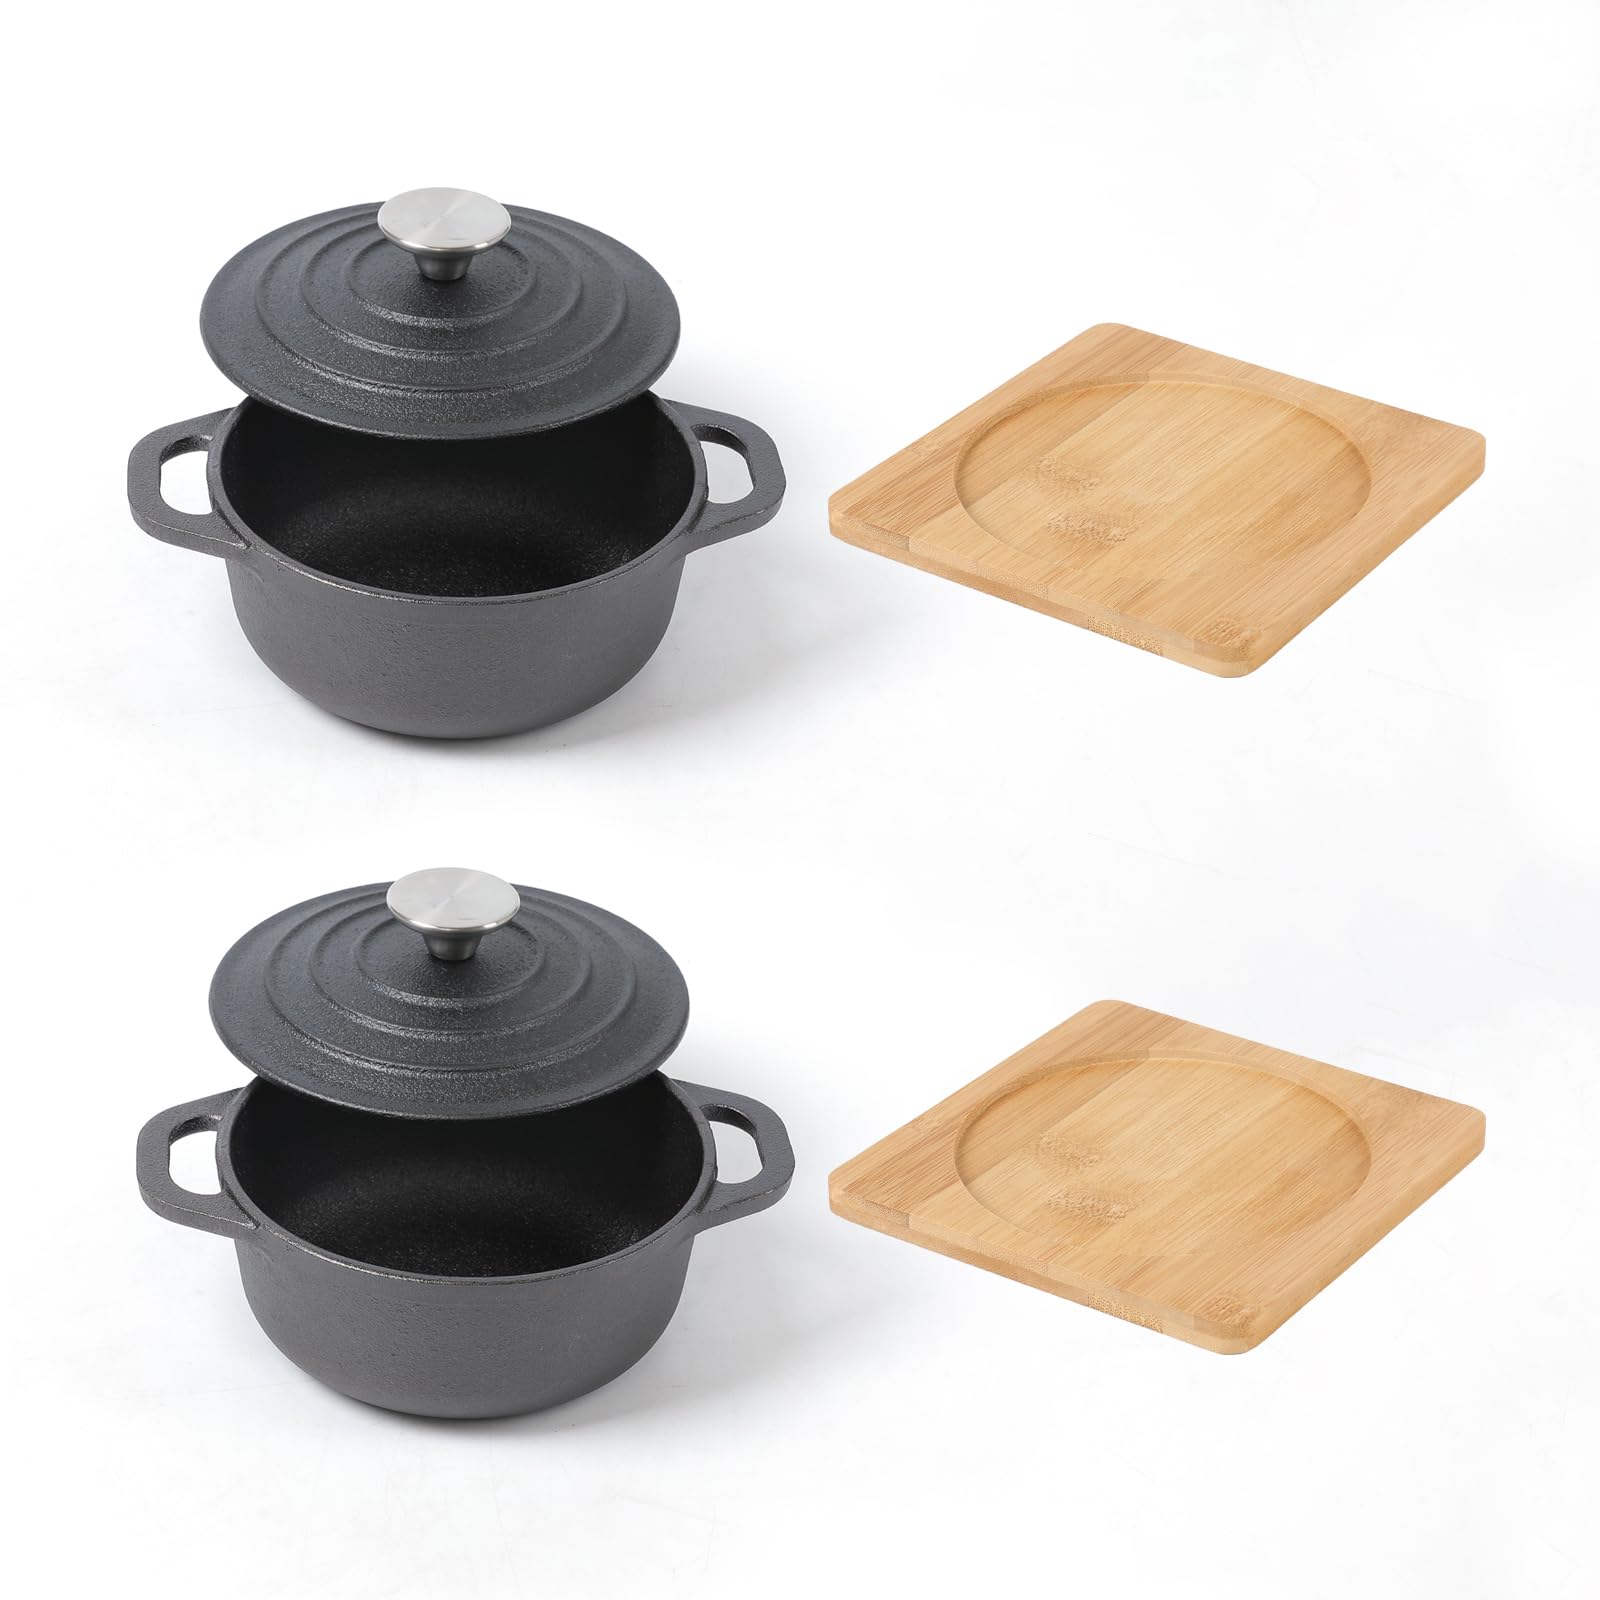 HAWOK Cast Iron Mini Round Cocotte Set, 0.7QT Mini Dutch Ovens with Lids and Bamboo Trays, 667ml/22.57oz/2.82cups, Set of 2, Black